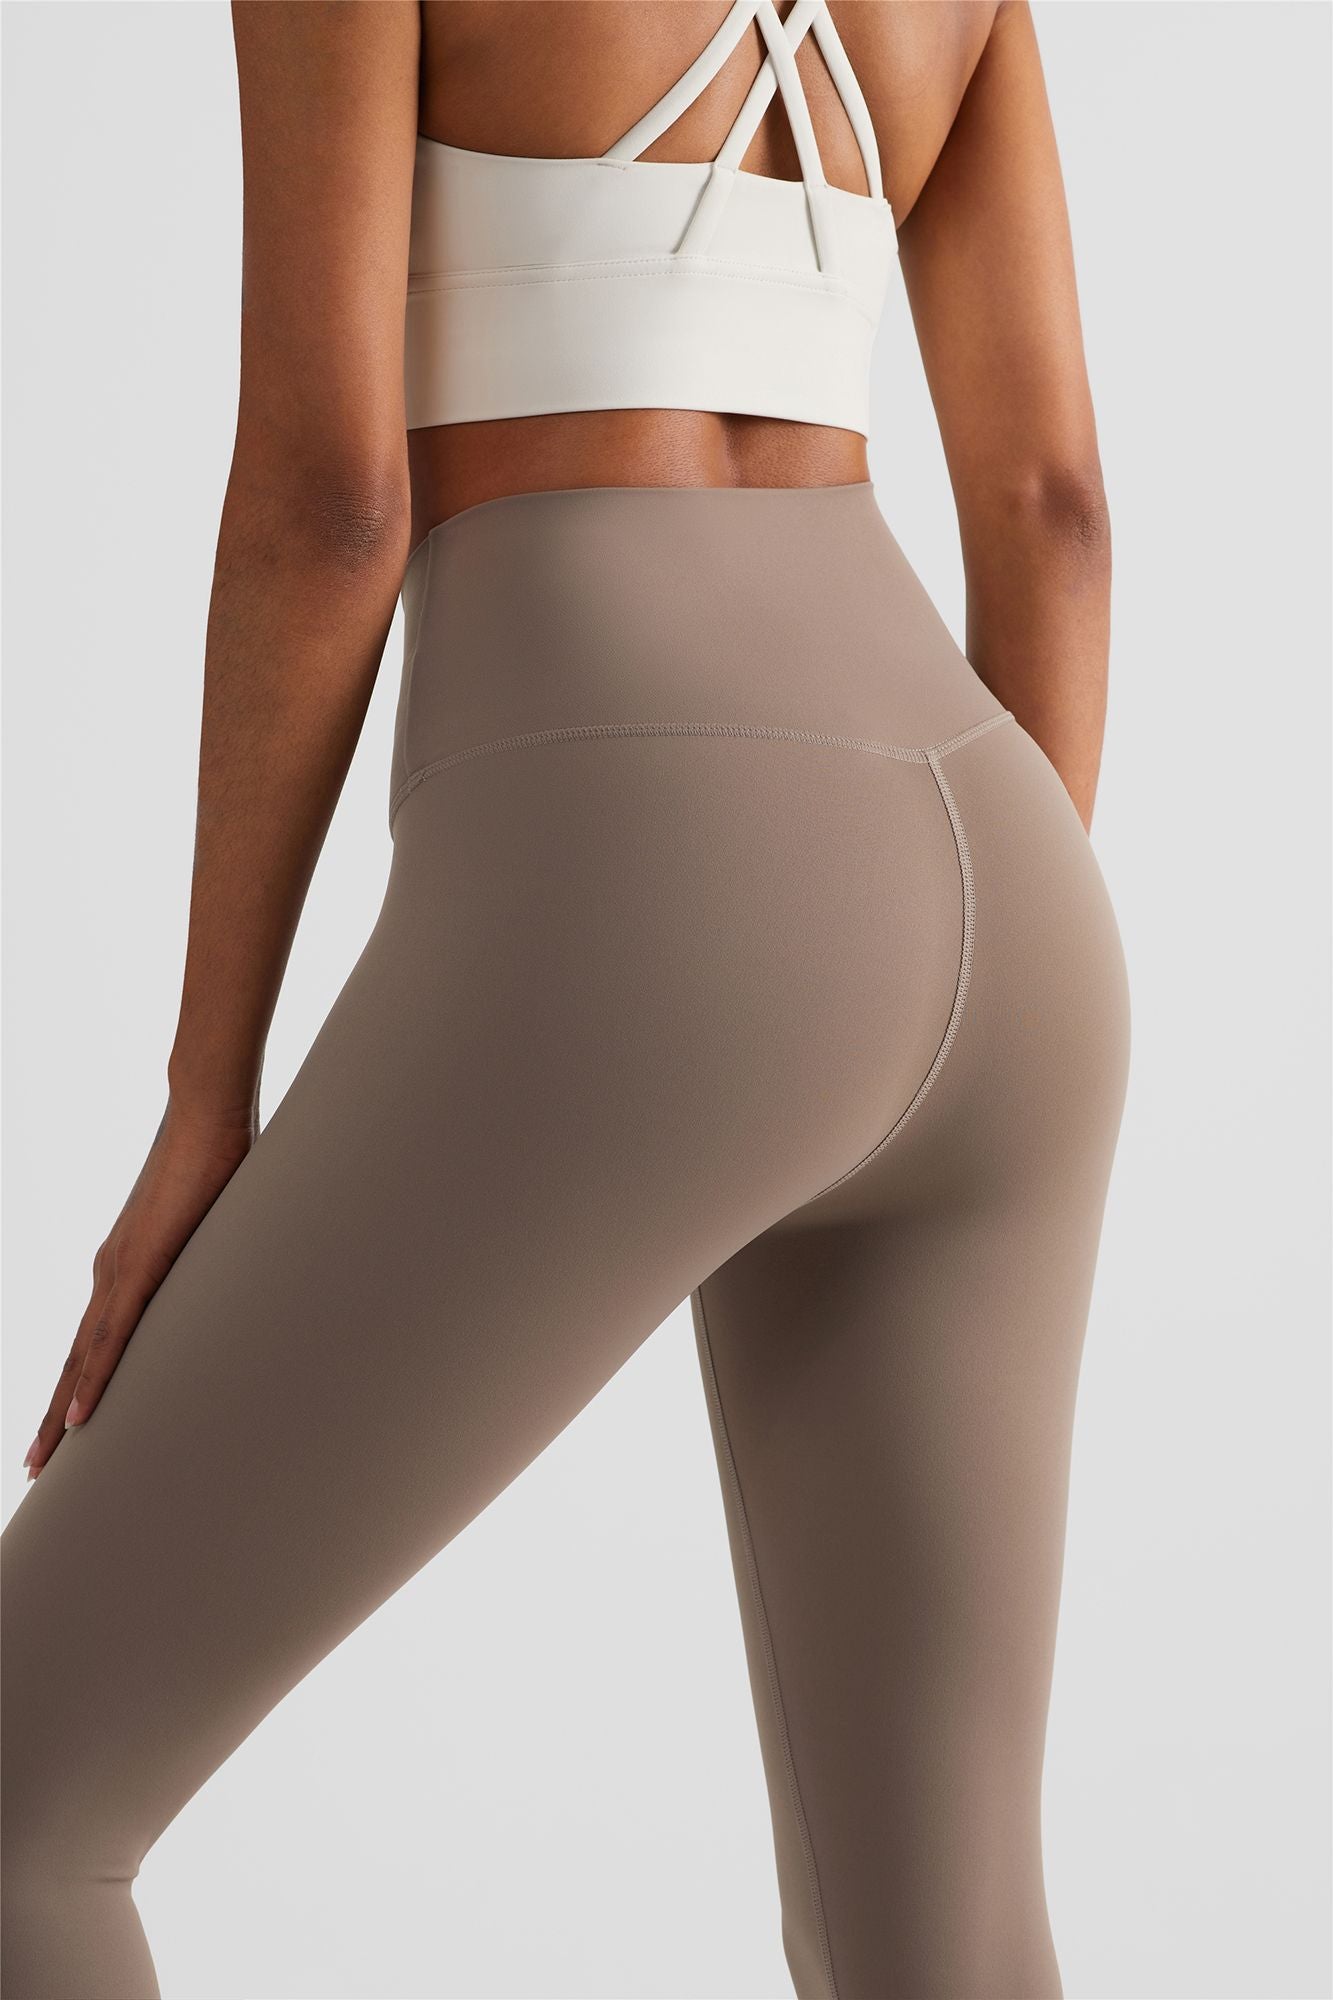 Try our new CLS-Flex Leggings. No front seam: To prevent unwanted ten